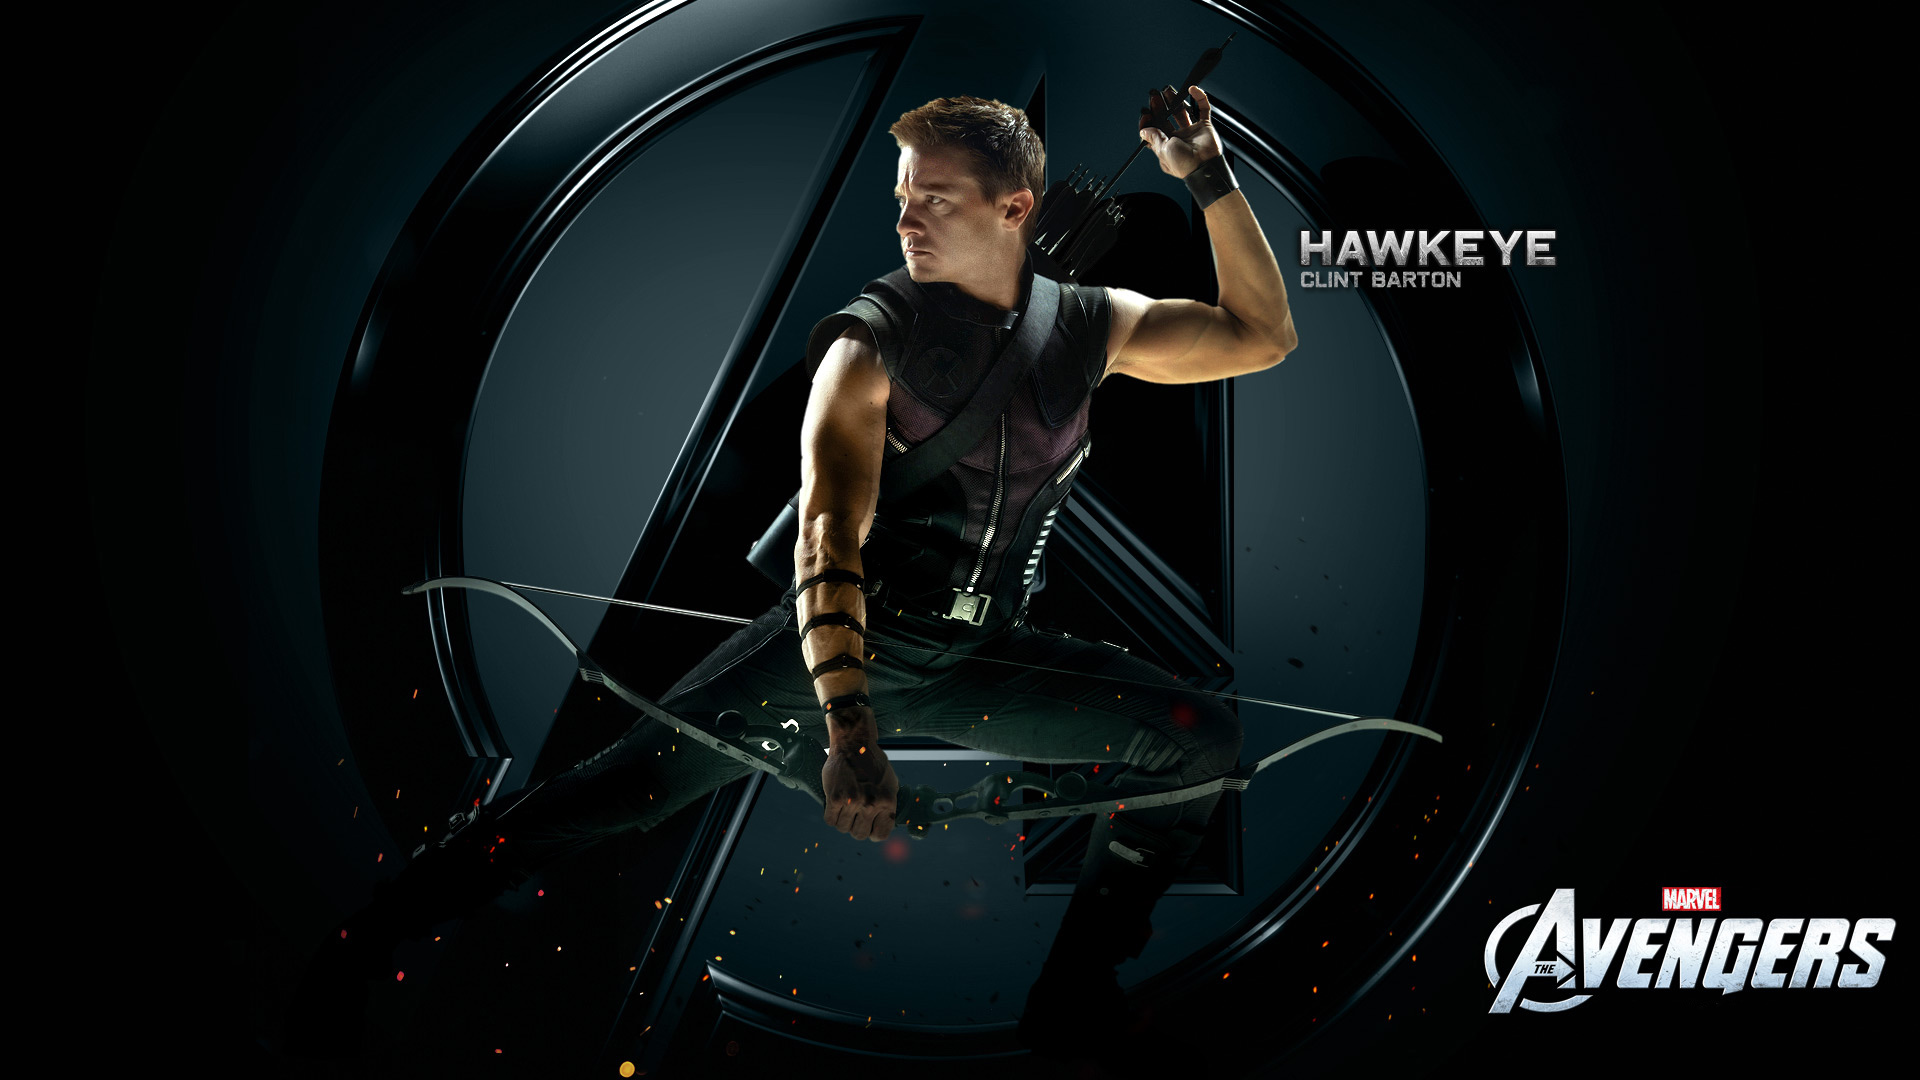 Hawkeye Hd Wallpaper Best Wallpapers PC Android iPhone and iPad